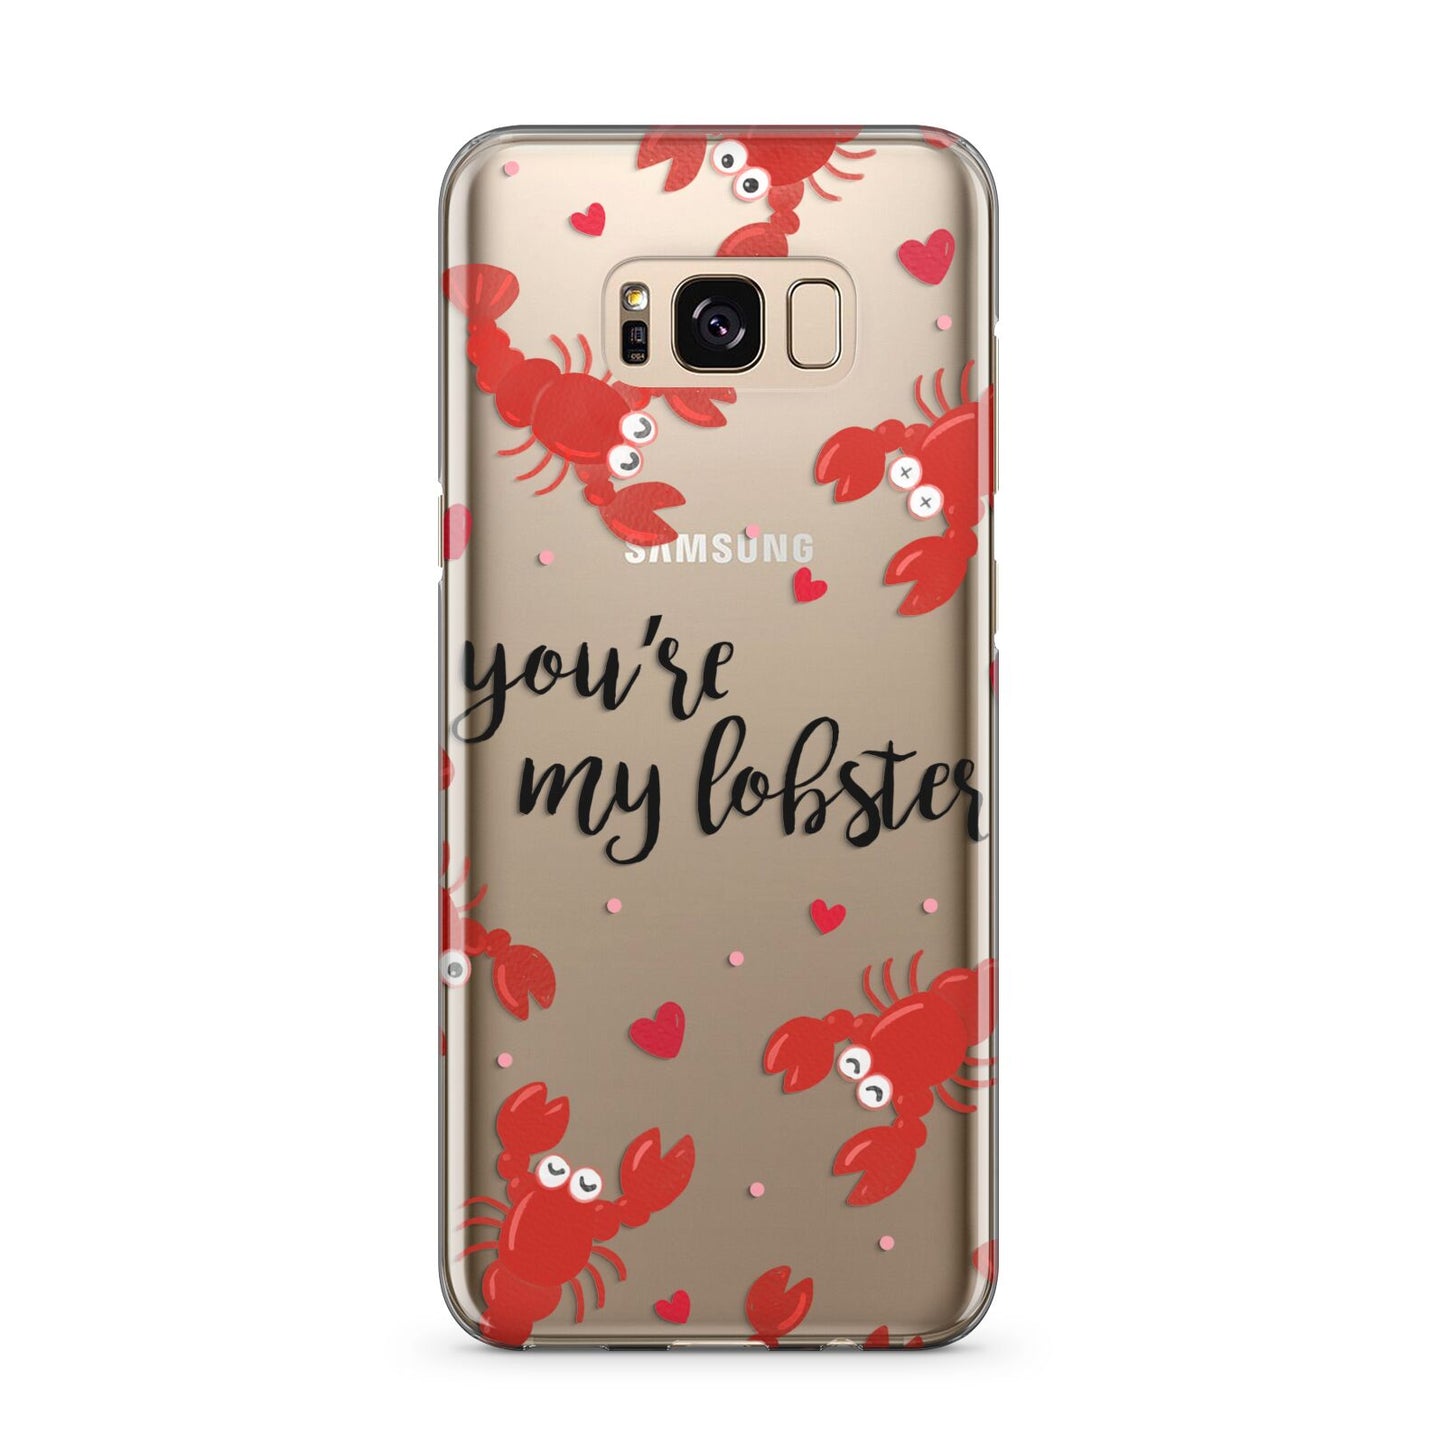 Youre My Lobster Samsung Galaxy S8 Plus Case